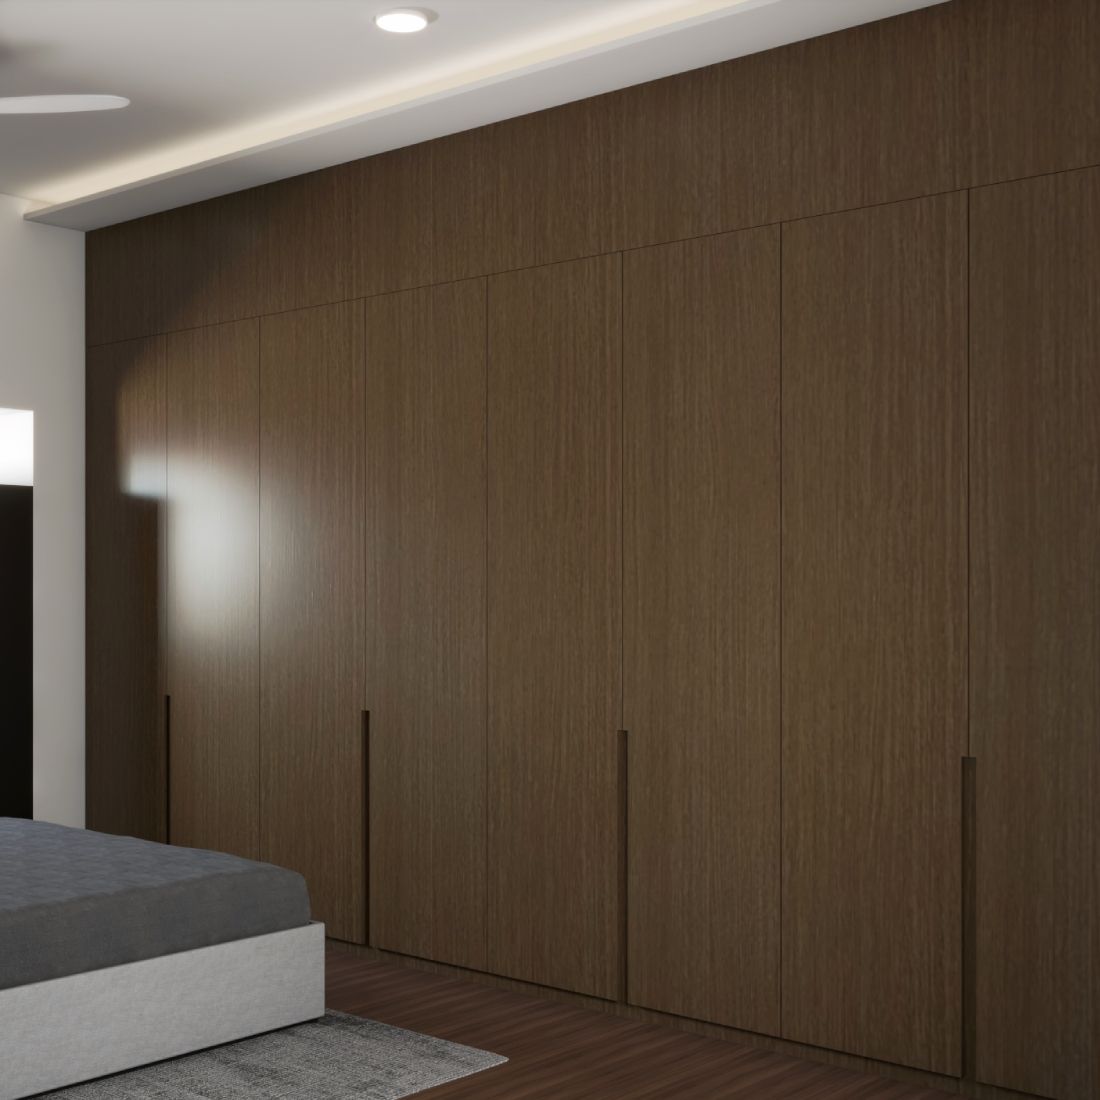 Contemporary Brown Laminate Design For Cabinets And Wardrobes